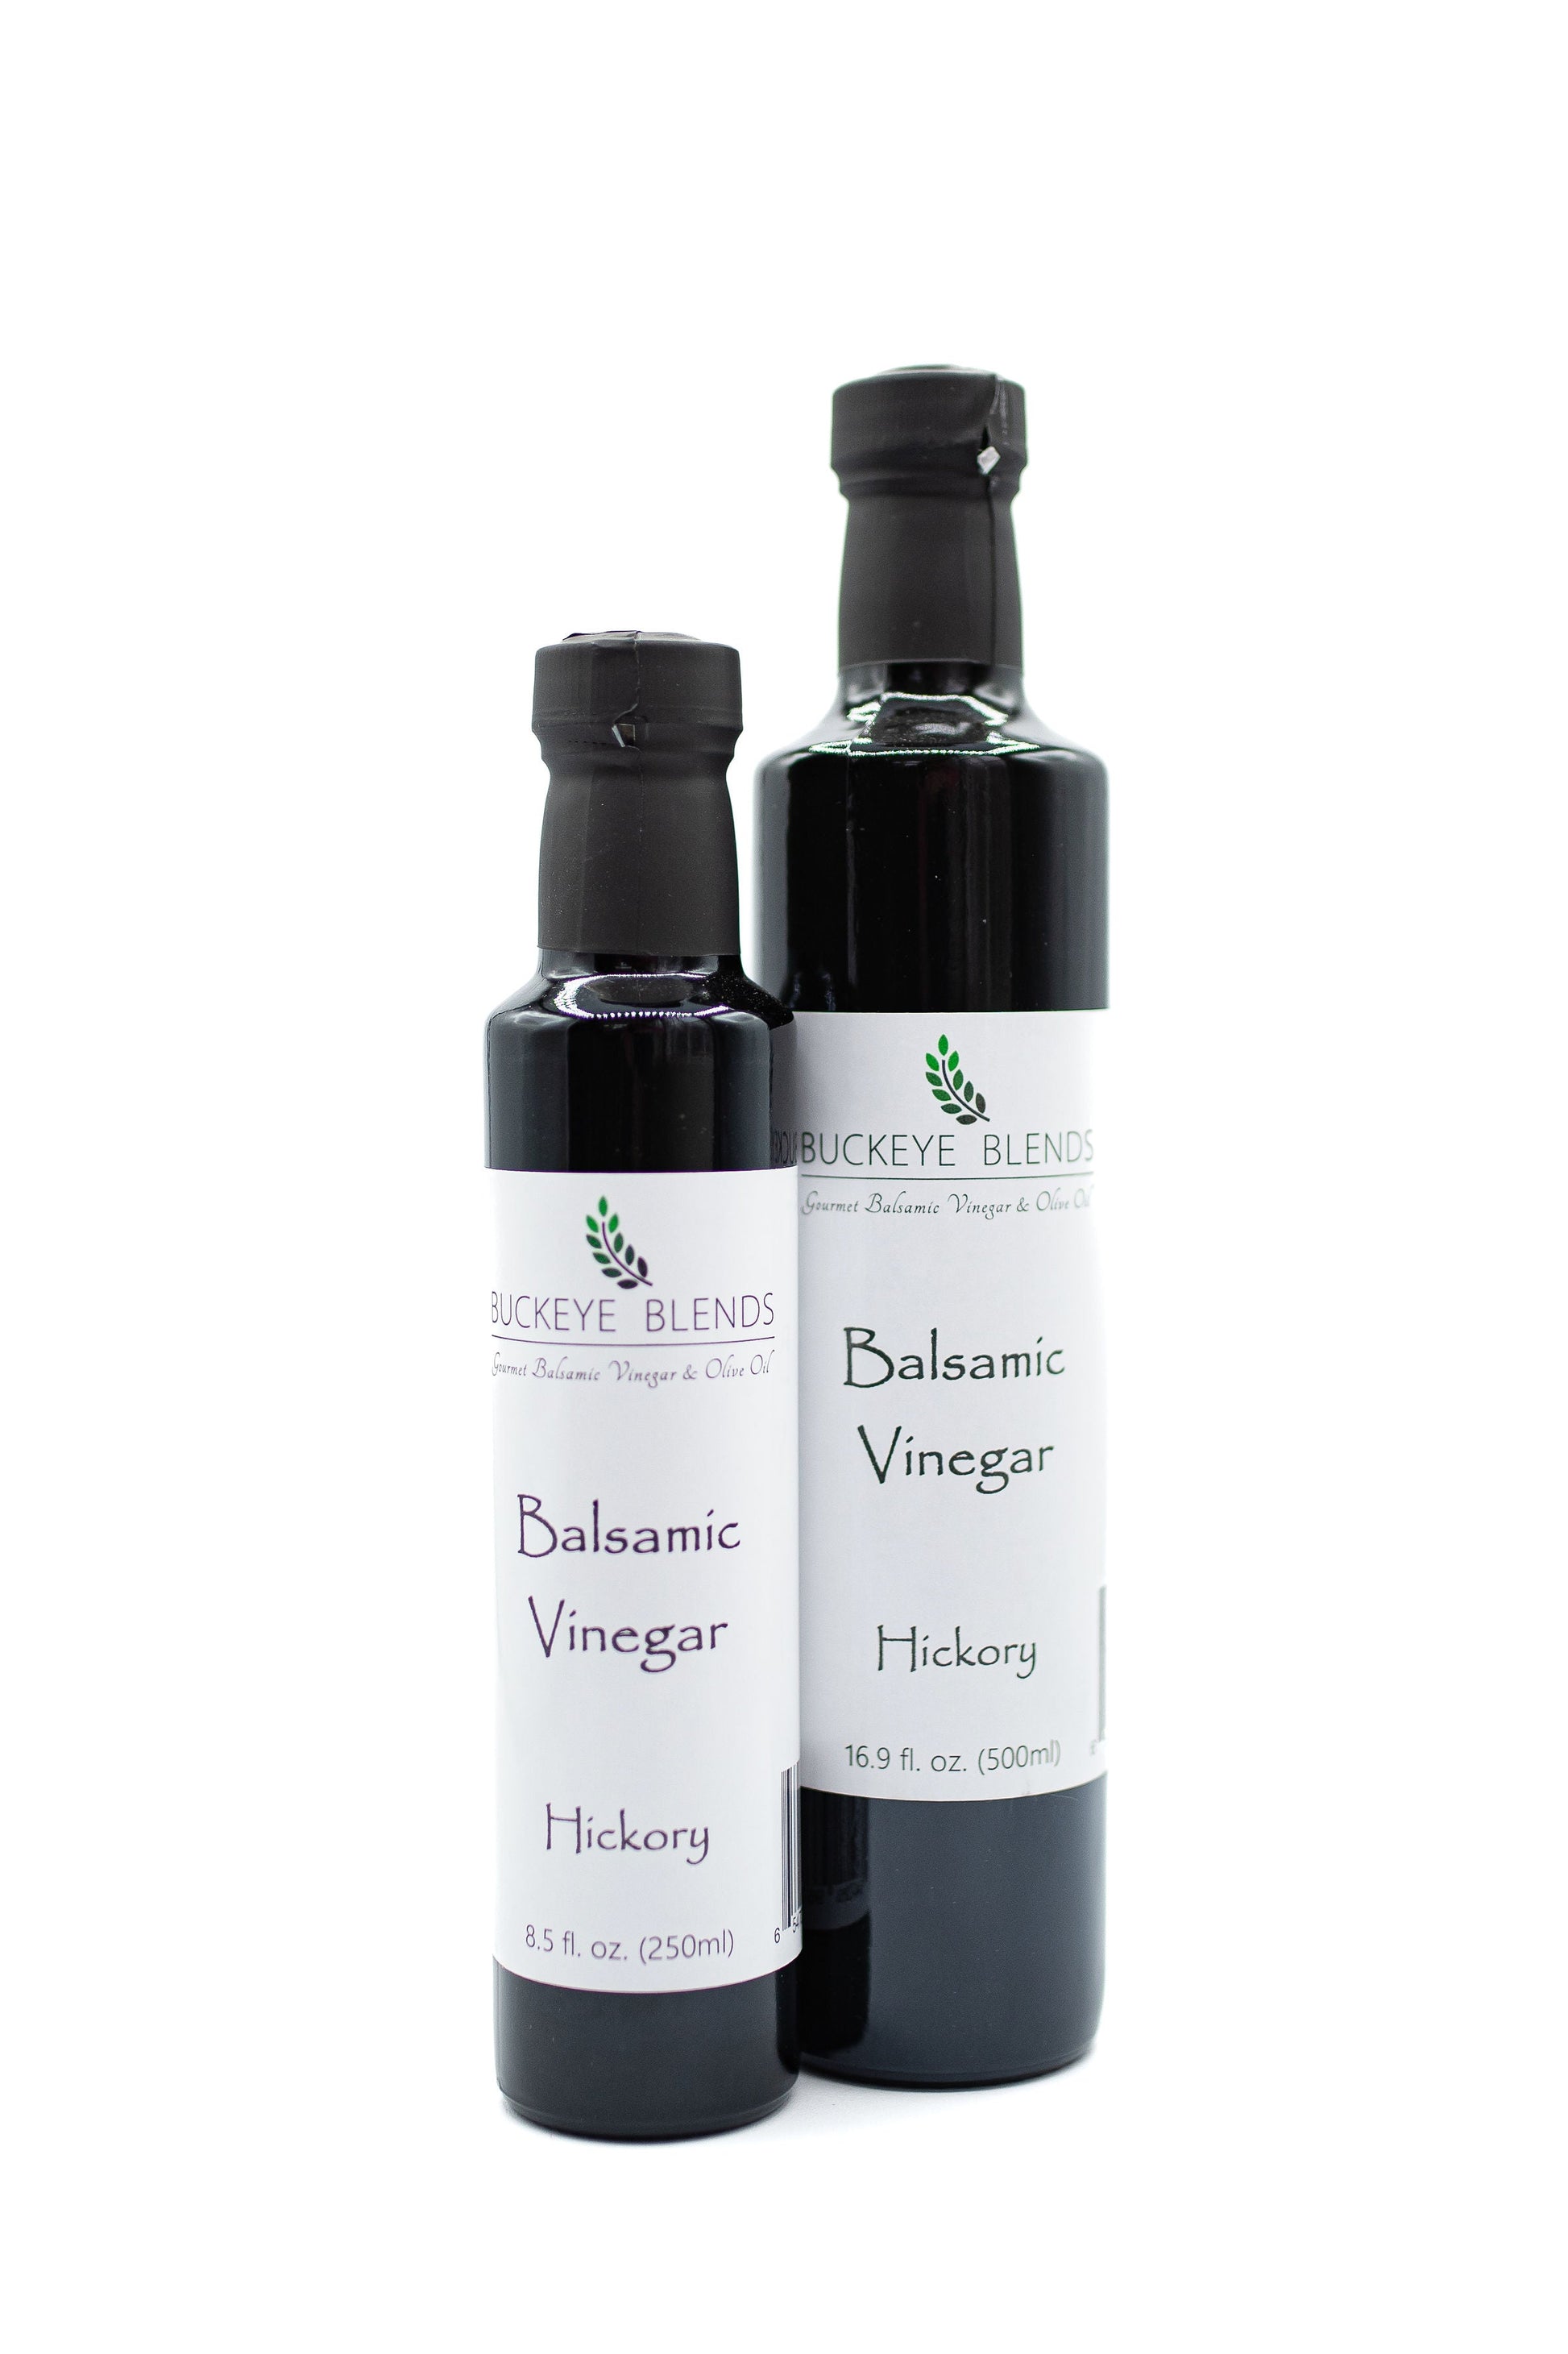 Buckeye Blends Hickory Balsamic Vinegar is the best balsamic if you are looking for a vinegar with a nice smoky flavor!  This barrel aged balsamic vinegar is the perfect vinegar for salad, seafood, chicken, and beef.   It's a smoked balsamic made with all natural hickory flavor.  Smoky but versatile, you'll find yourself using it on every dish!